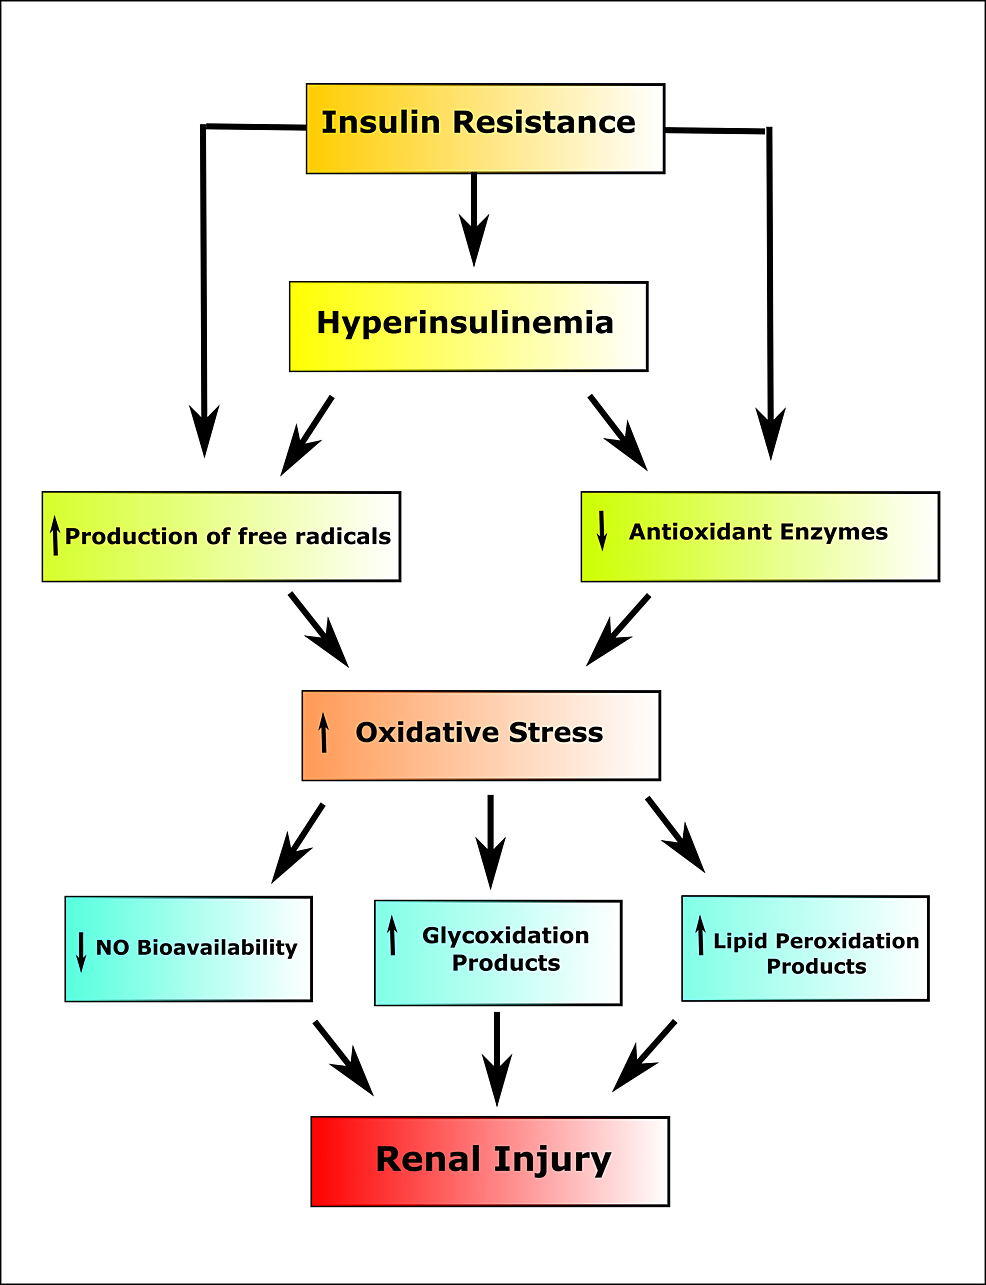 Process-of-the-generation-of-renal-injury-in-insulin-resistance.